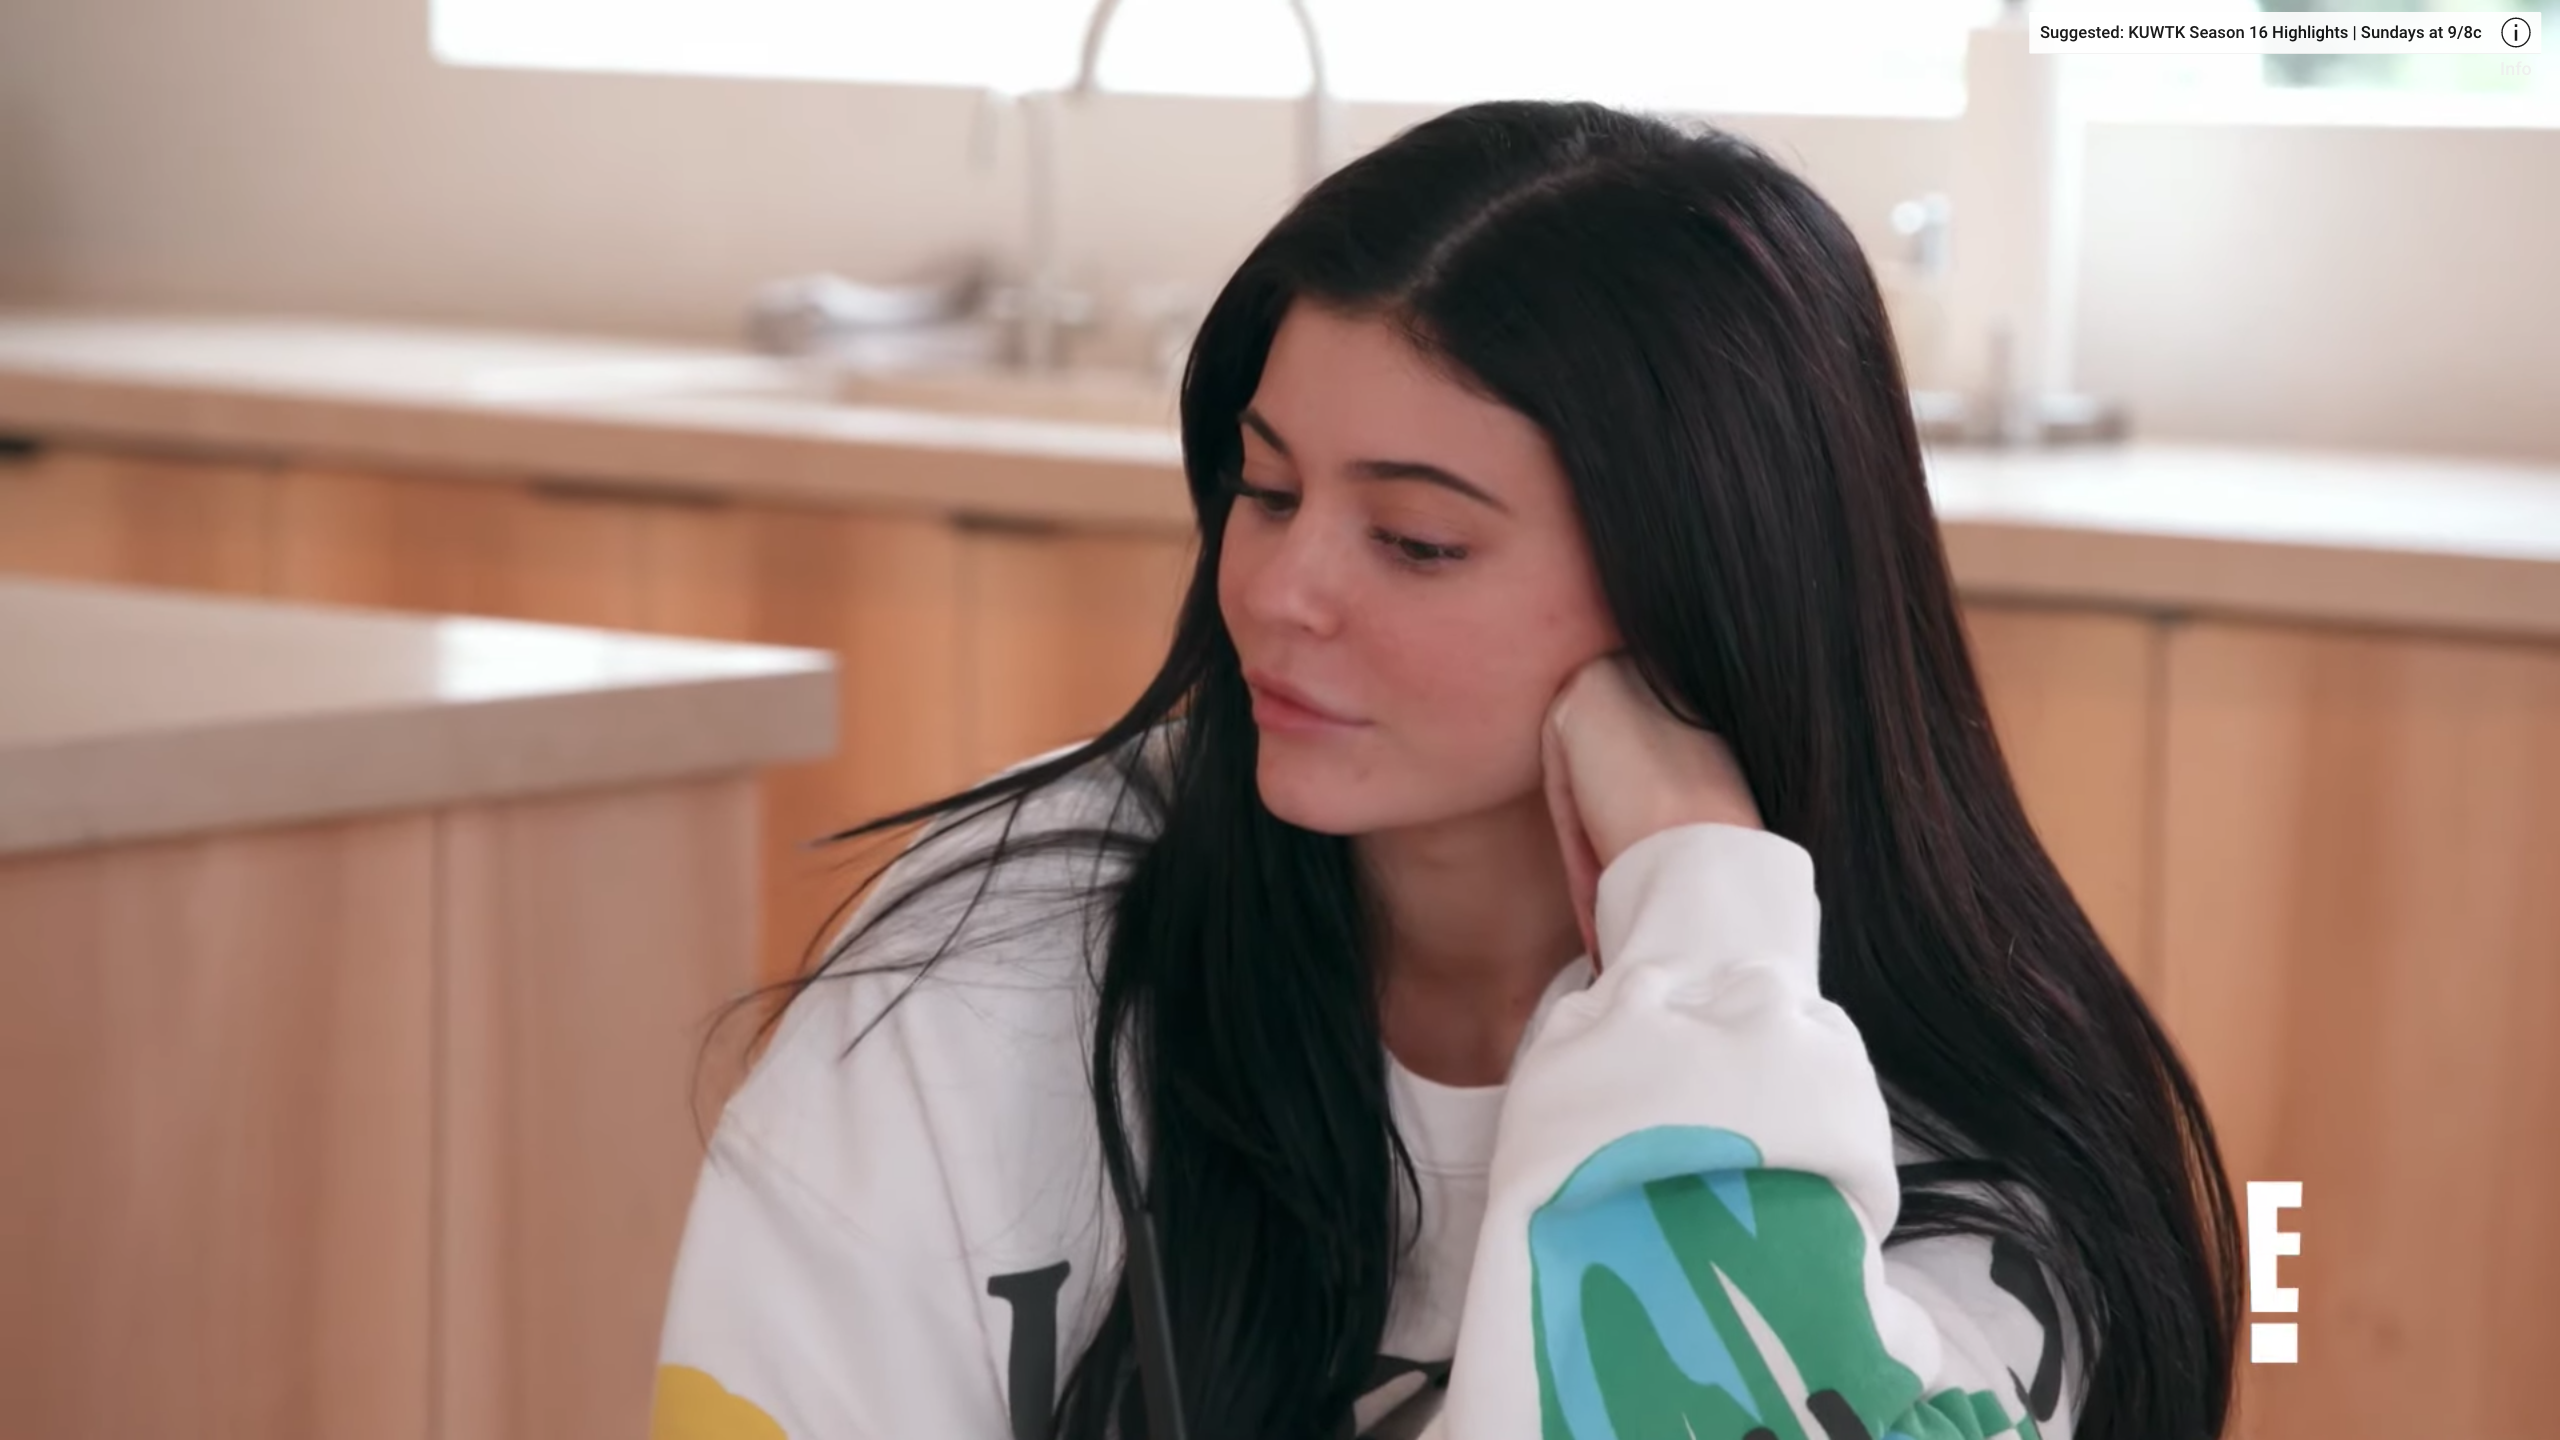 Kylie Jenner Says She S Scared Of Jordyn Woods In Kuwtk Clip